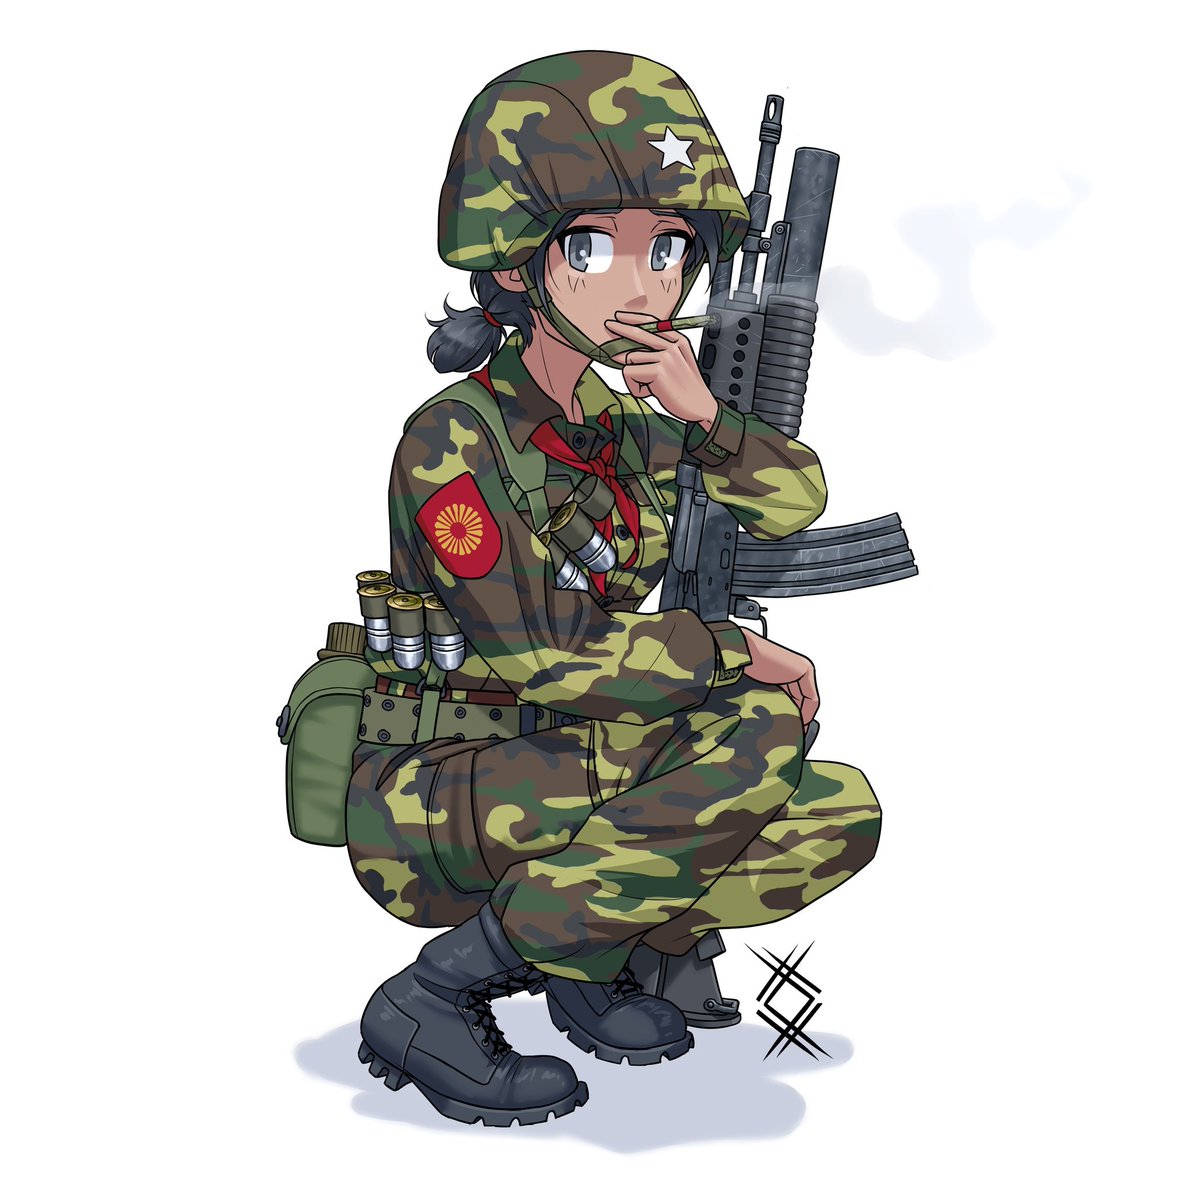 Eastwind Burmese Army Girl Commission For Distant Witness Myanmar Burma Camouflage Rifle Army Animegirl Art Commission T Co Jc08wfsxls